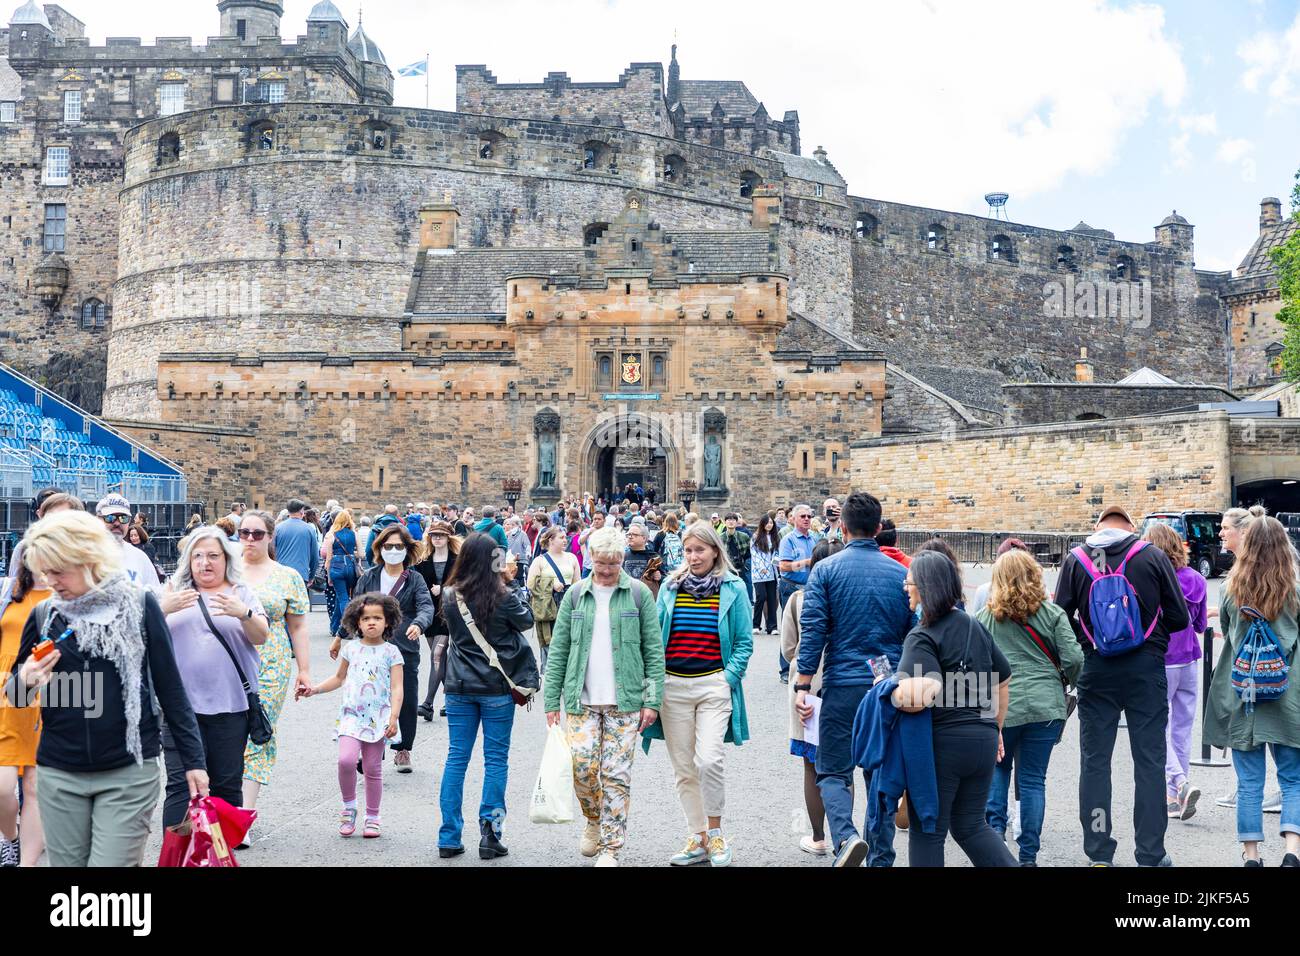 Edinburgh castle, tourists and visitors to the castle leave after their visit, on a summers day in July 2022 the crowds are large,Scotland,Uk Stock Photo